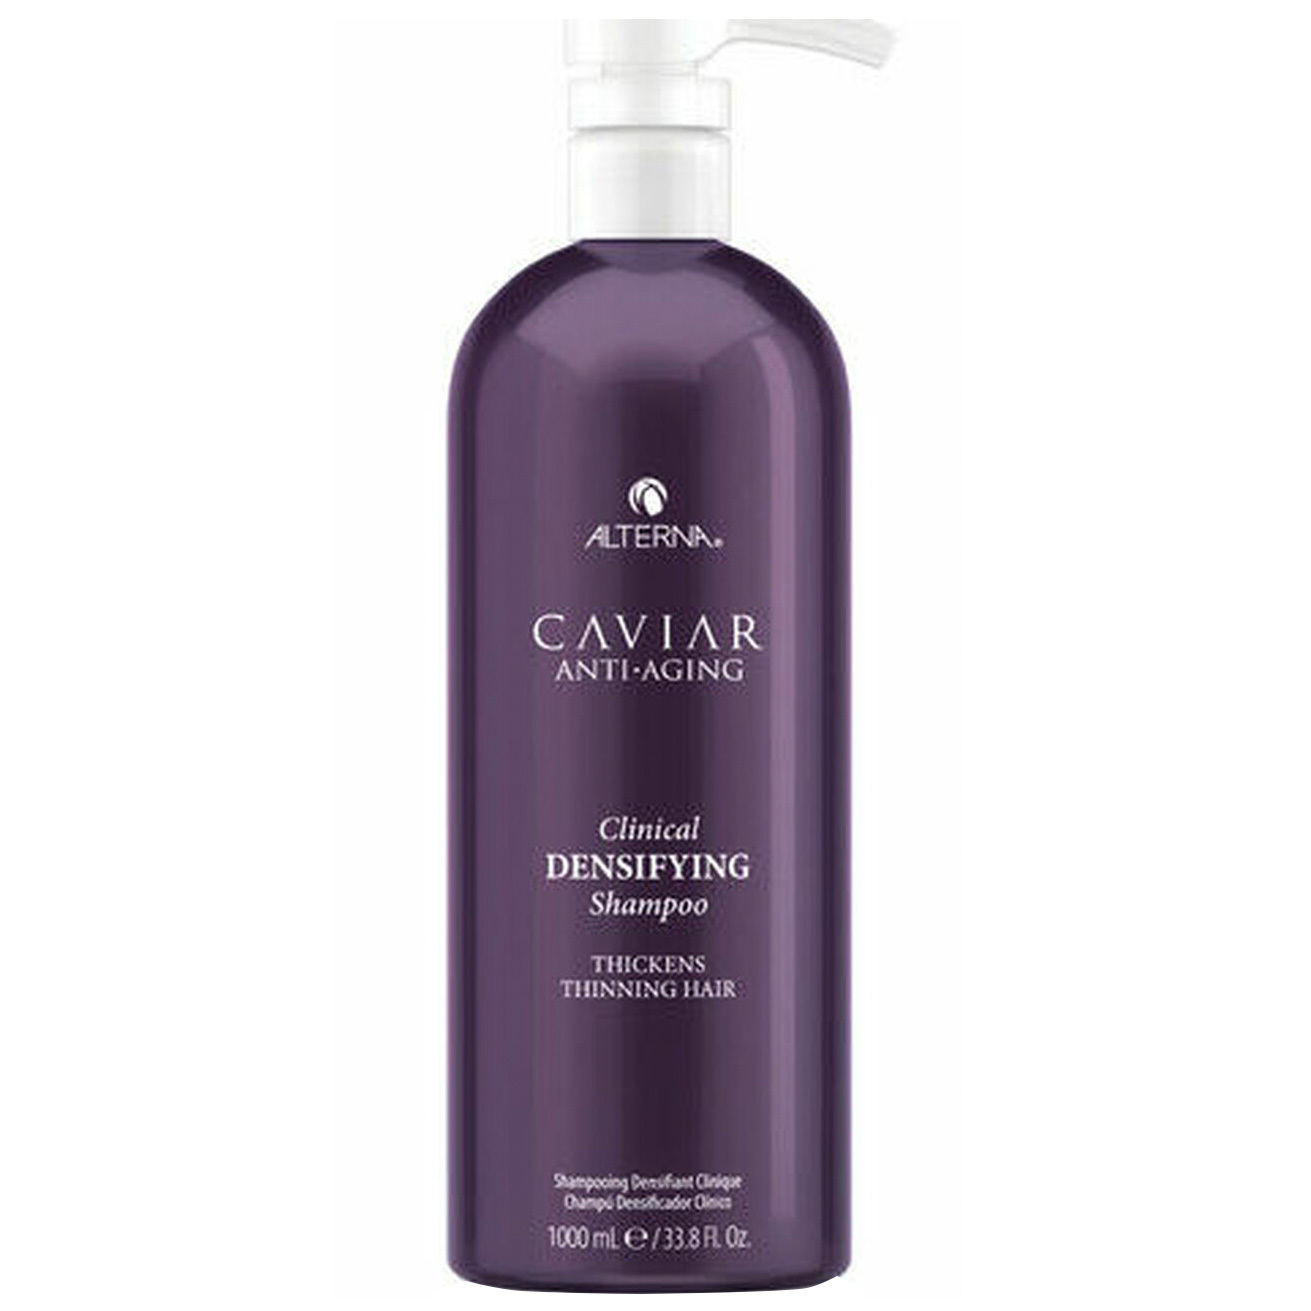 Lad os gøre det skuffe pegefinger ALTERNA Caviar Anti-Aging Densifying Clinical Shampoo - 1 liter | Ethos  Beauty Partners